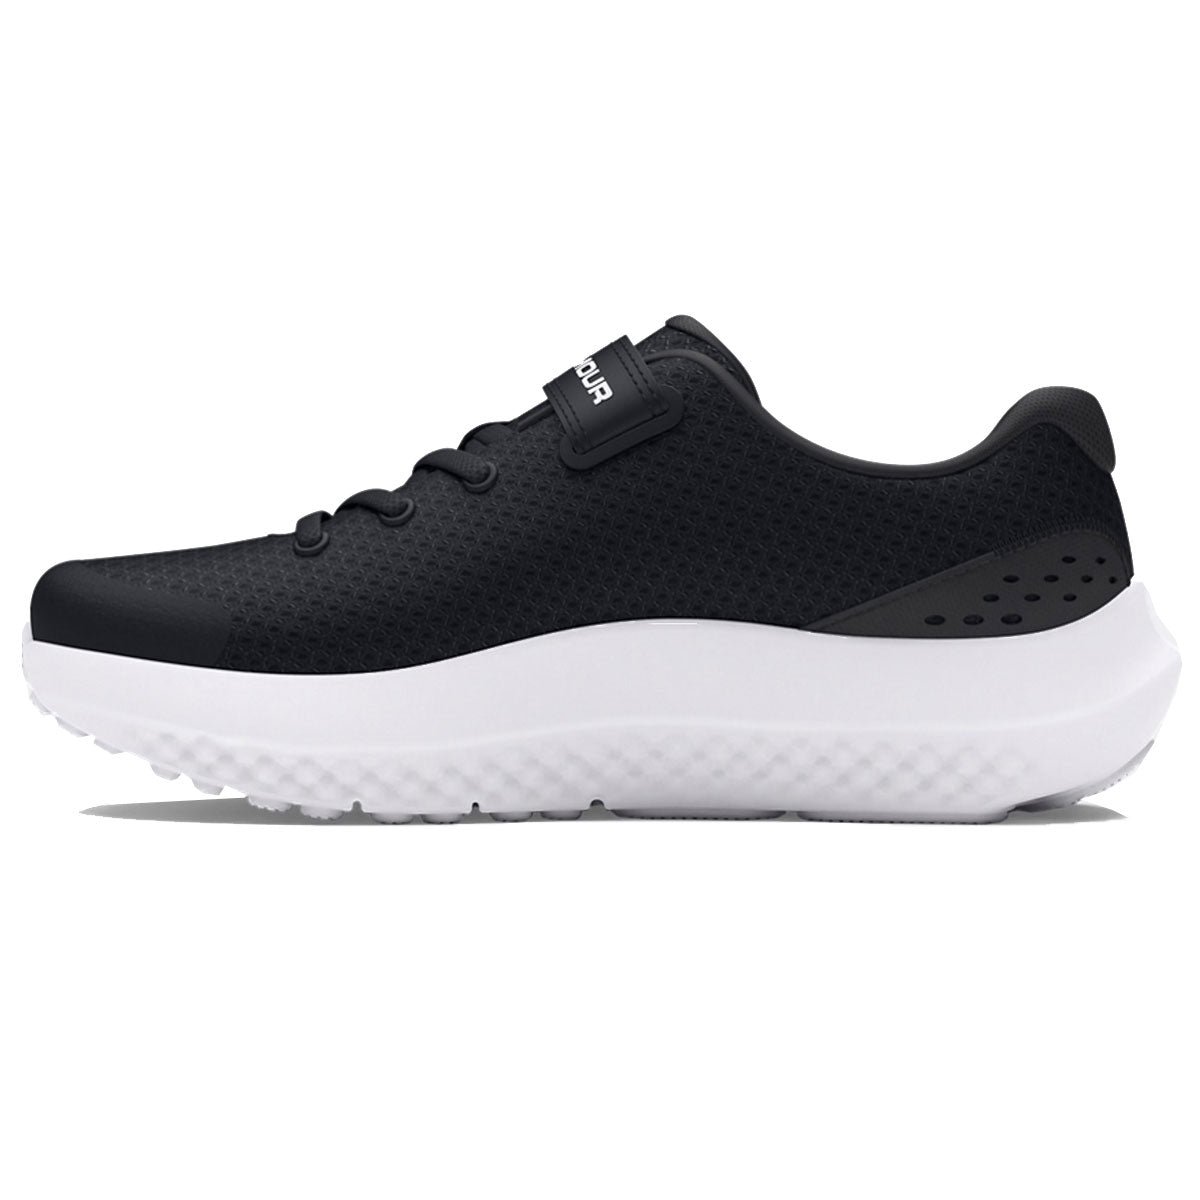 Under Armour BPS Surge 4 AC Running Shoes - Boys - Black/Anthracite/White